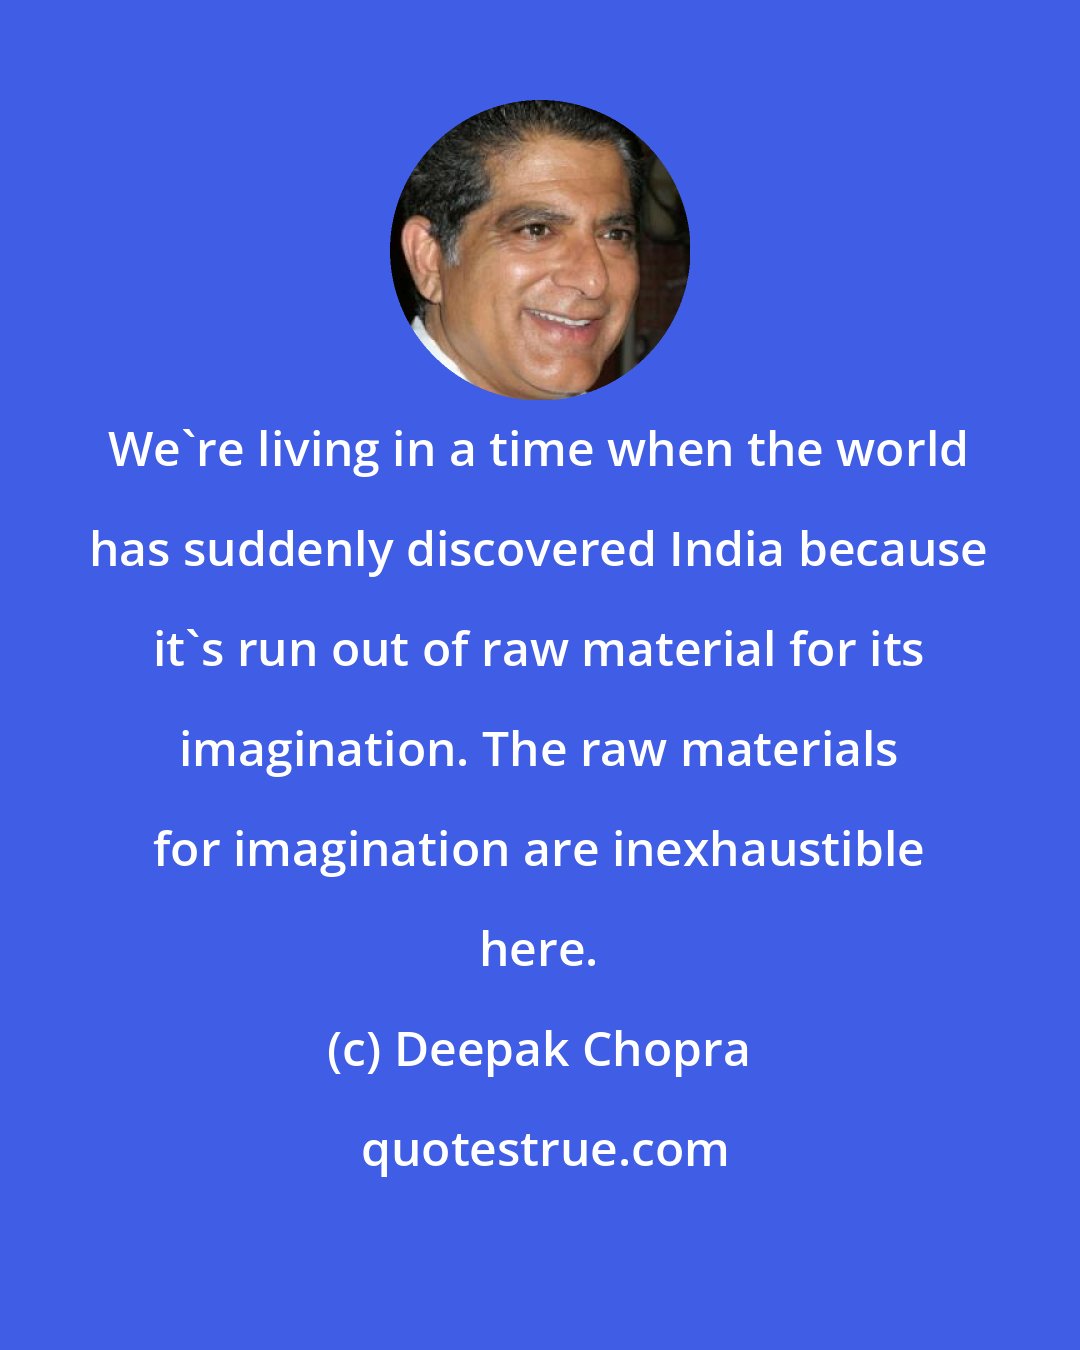 Deepak Chopra: We're living in a time when the world has suddenly discovered India because it's run out of raw material for its imagination. The raw materials for imagination are inexhaustible here.